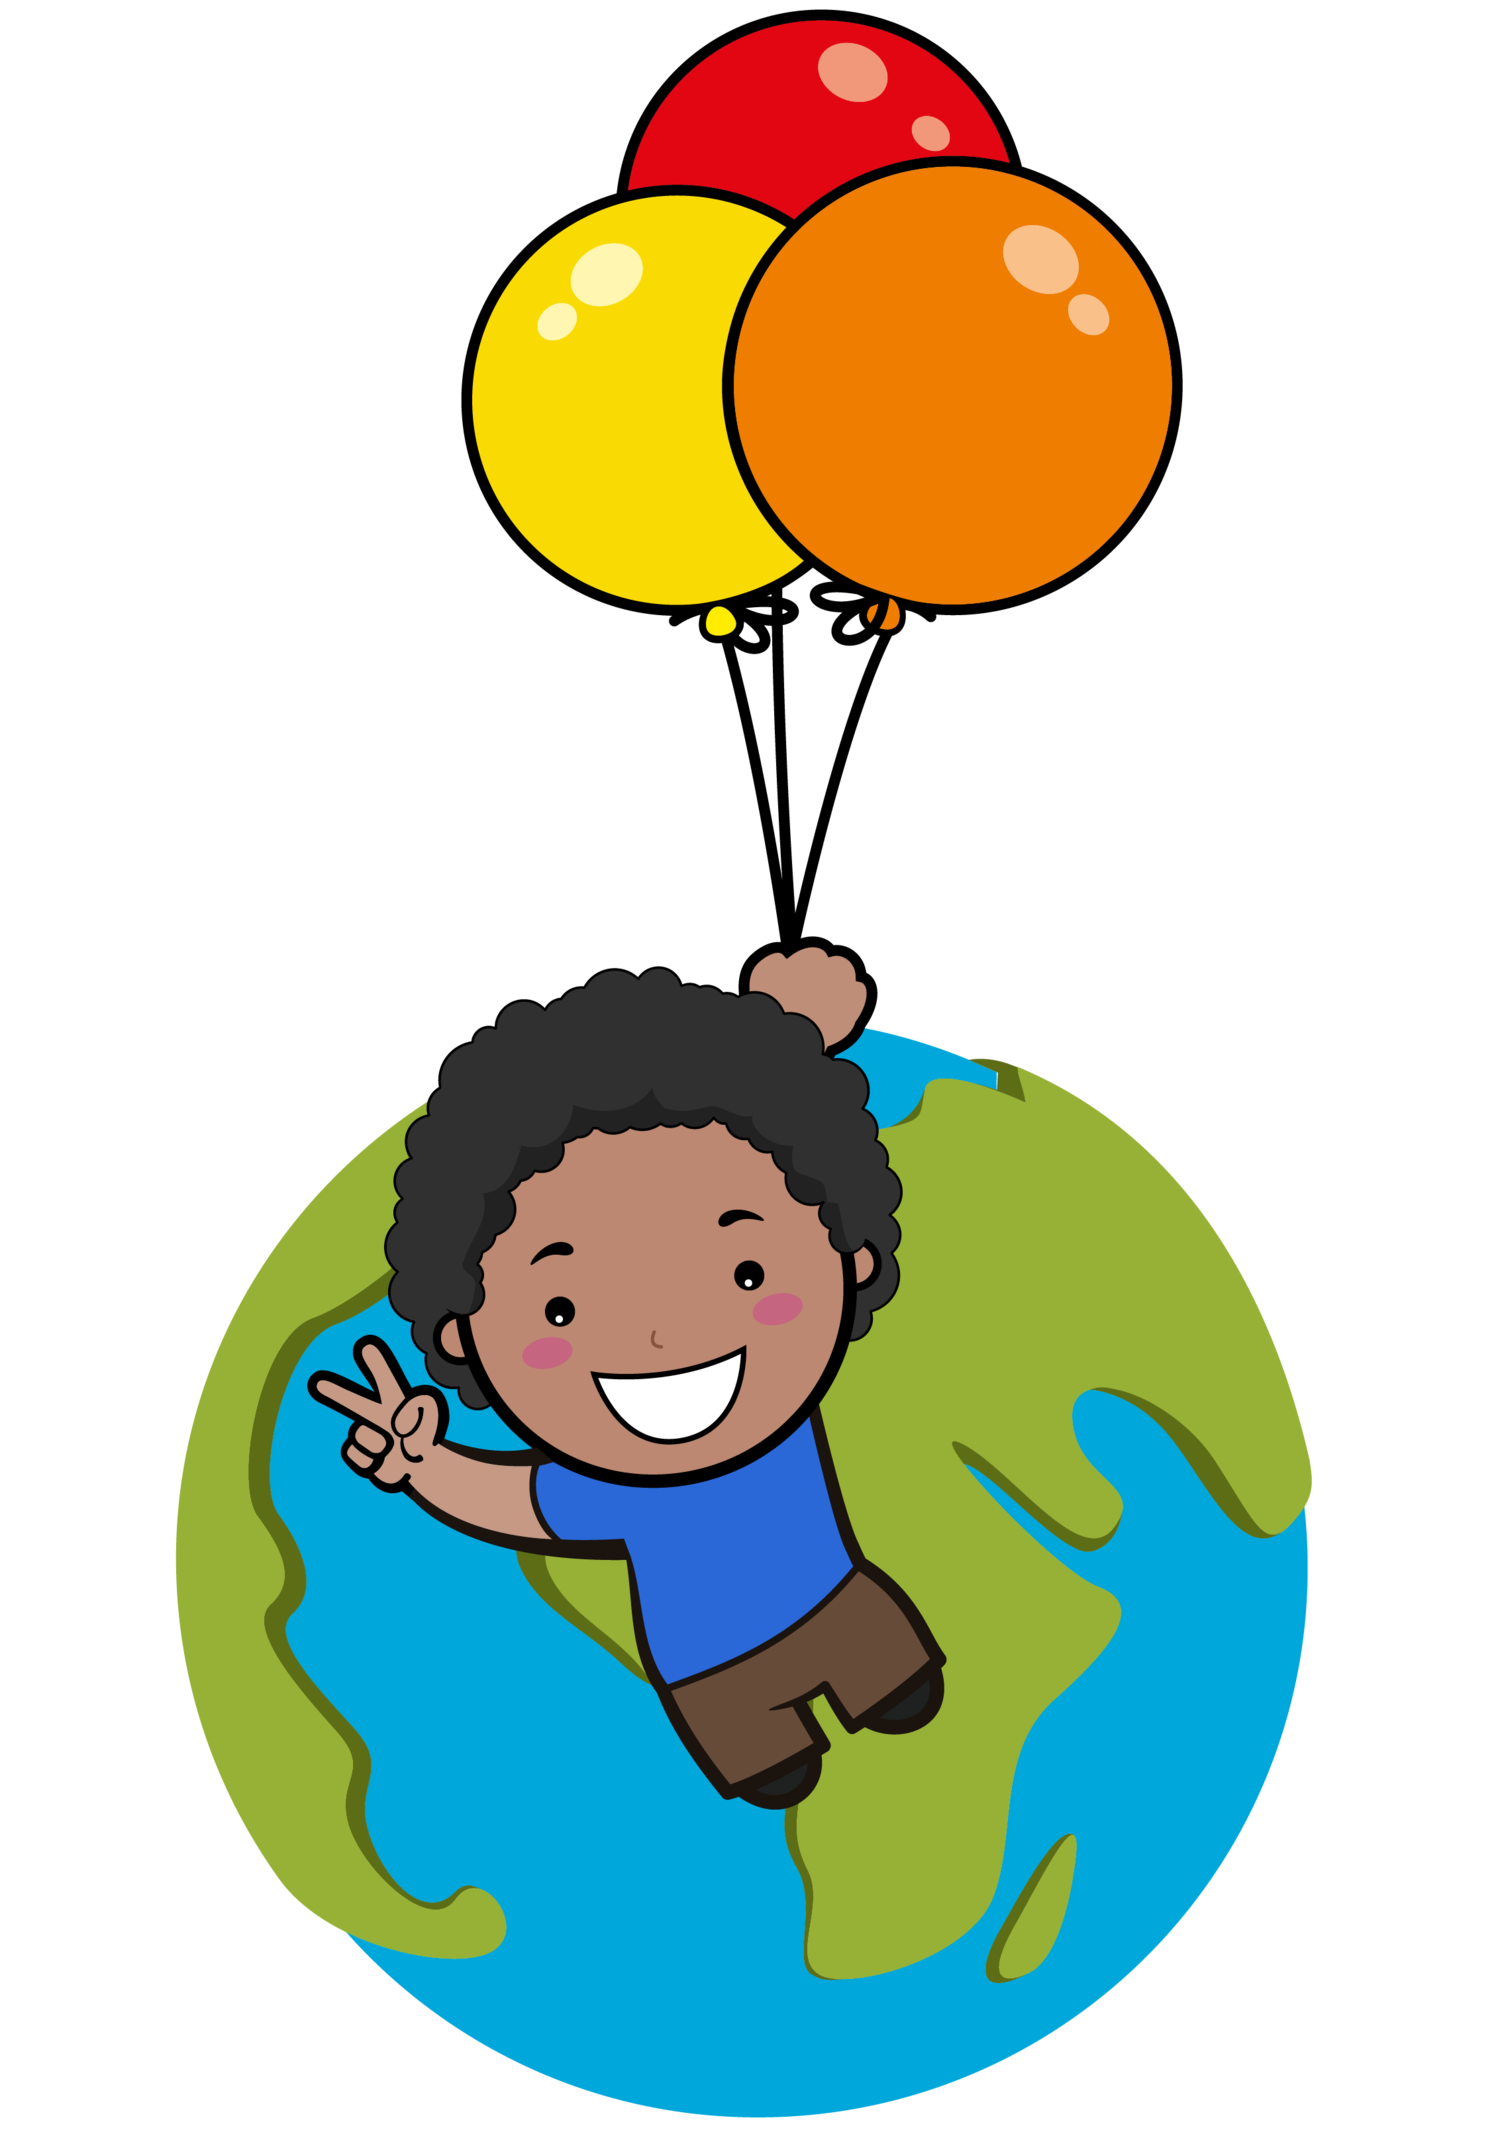 Banner Transparent Library About Us Chantal Paydar - Child (1500x2134)